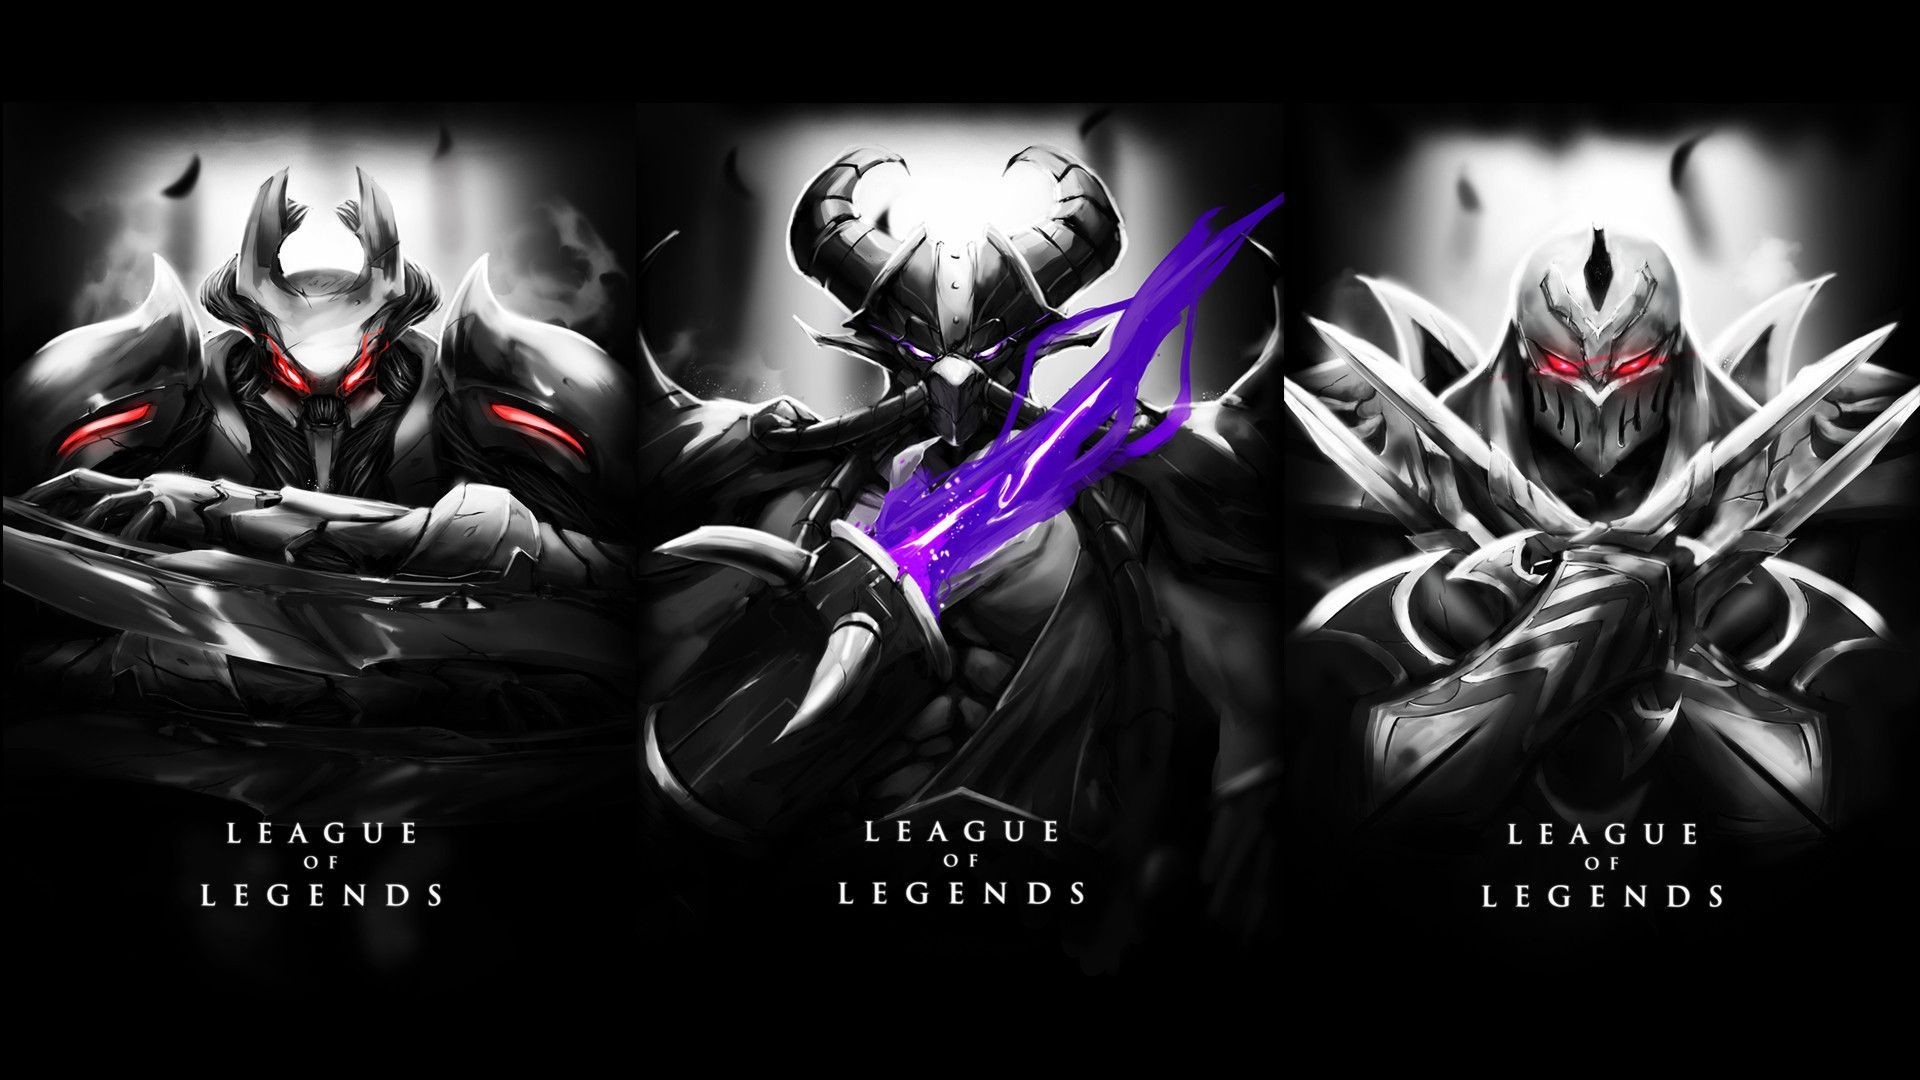 1920x1080 League Of Legends HD Wallpapers Backgrounds Wallpaper Wallpapers League Of  Legends Wallpapers)